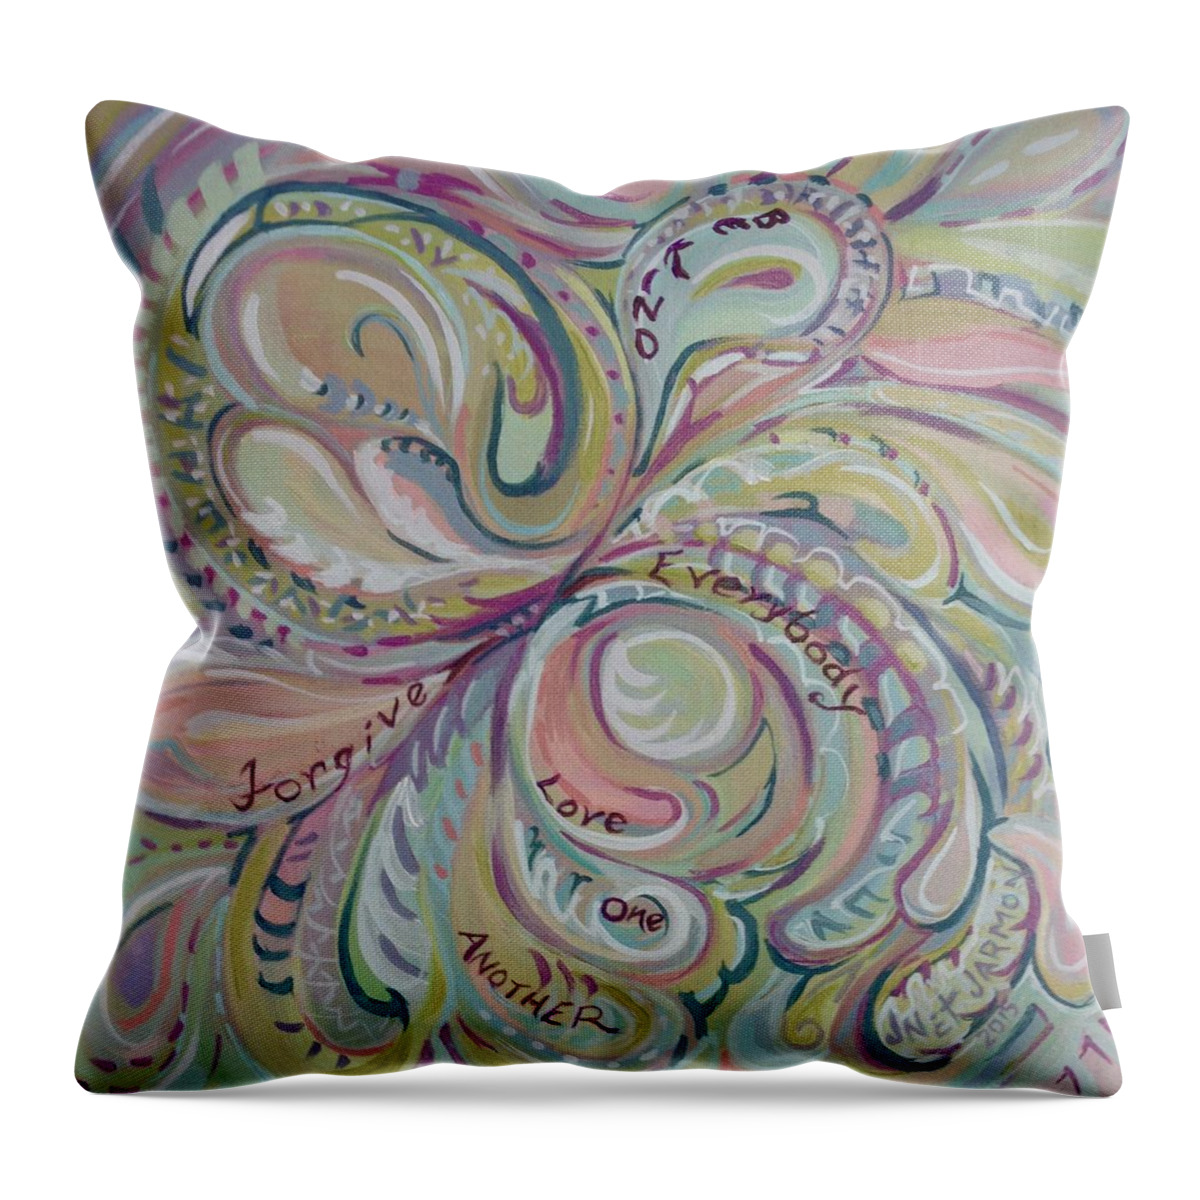 Forgiveness Throw Pillow featuring the painting Summer Sermon 2 by Jeanette Jarmon